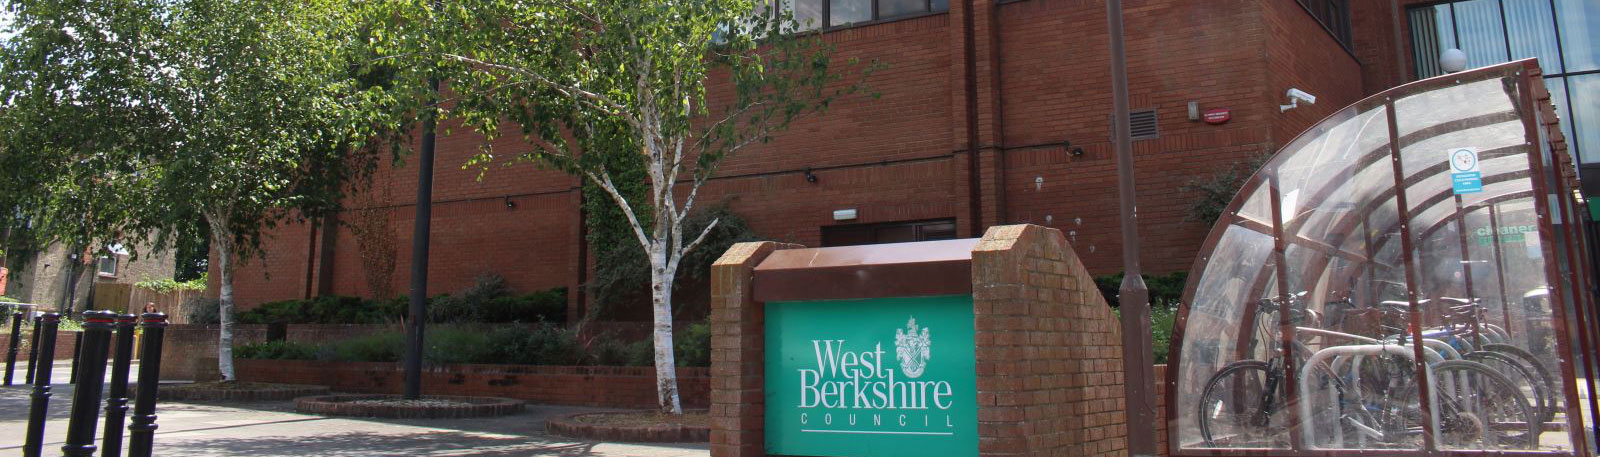 Exterior view of a council building with a bike stands and a "West Berkshire Council" sign